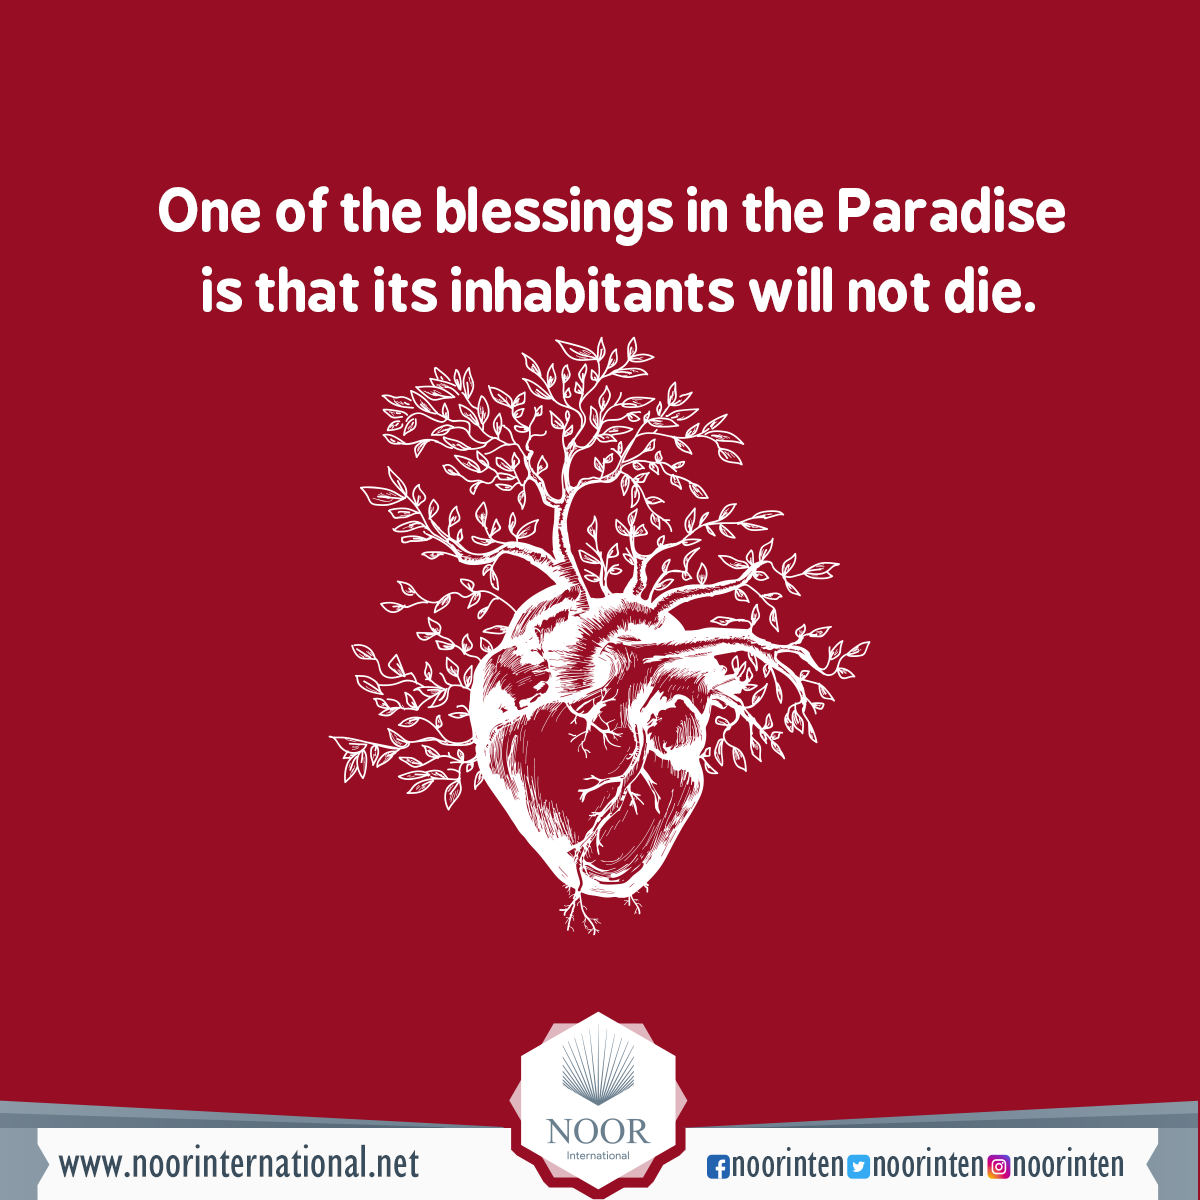 One of the blessings in the Paradise is that its inhabitants will not die.